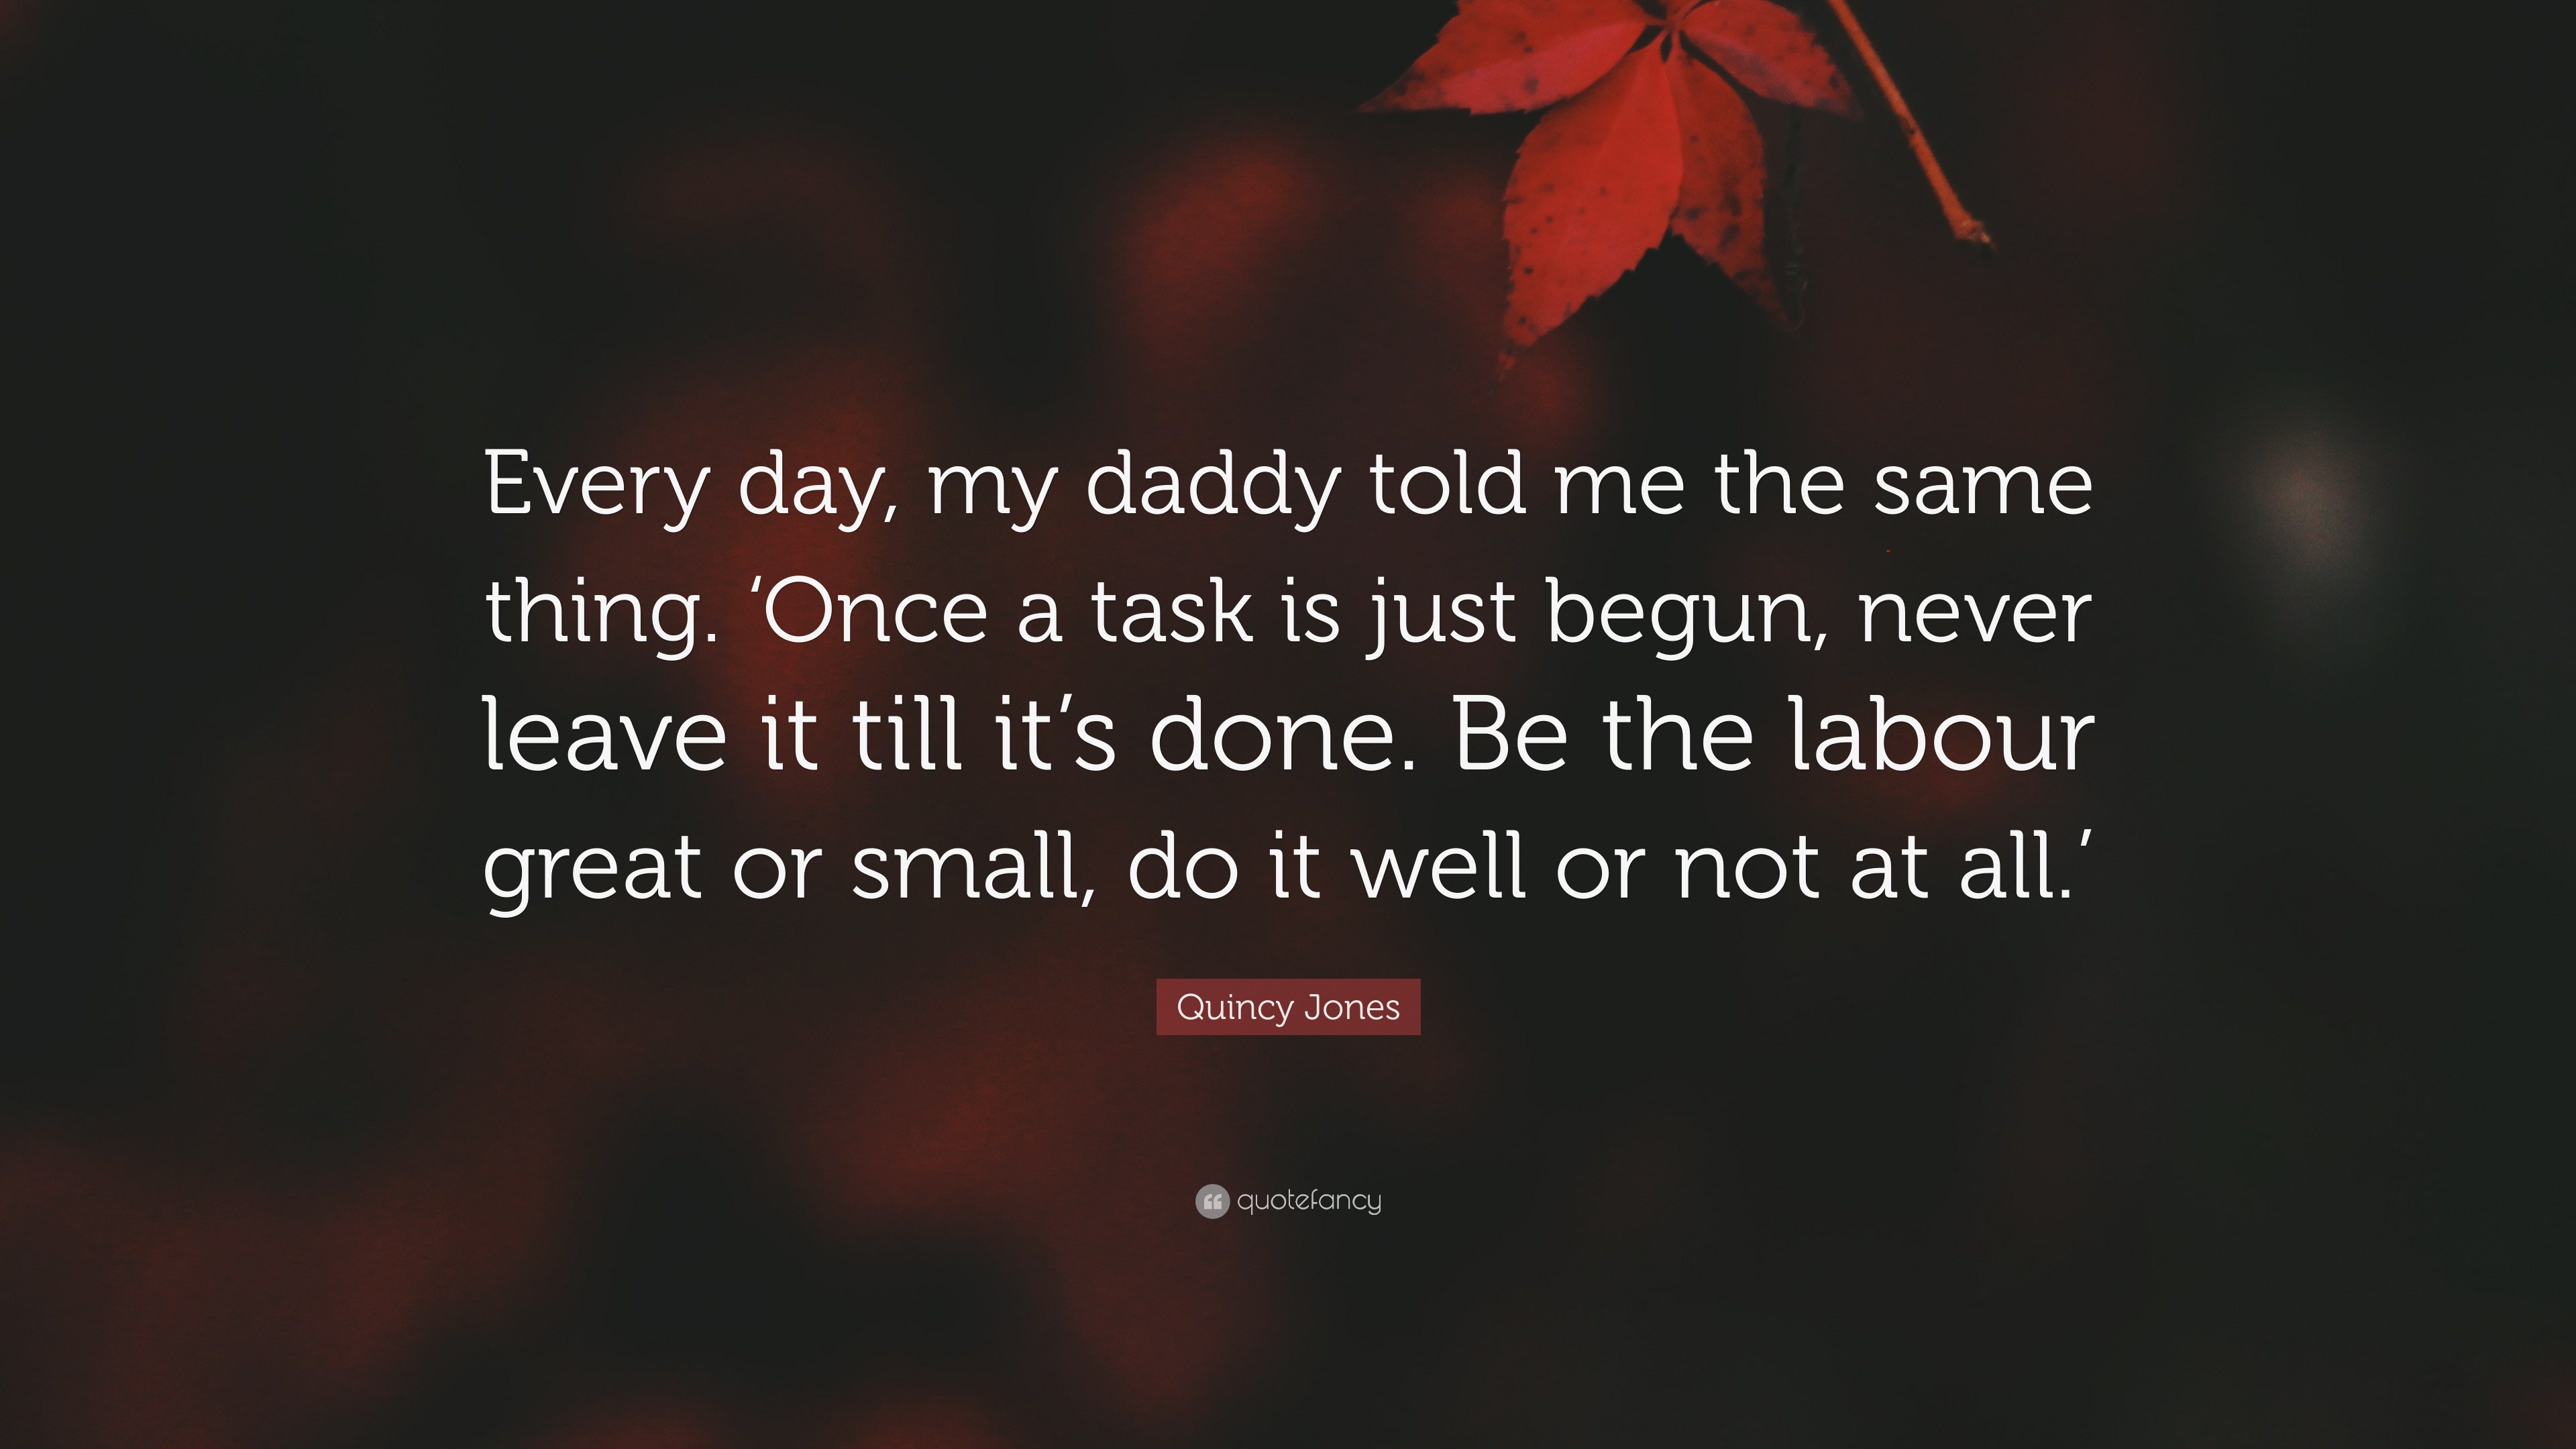 Quincy Jones Quote “every Day My Daddy Told Me The Same Thing ‘once A Task Is Just Begun